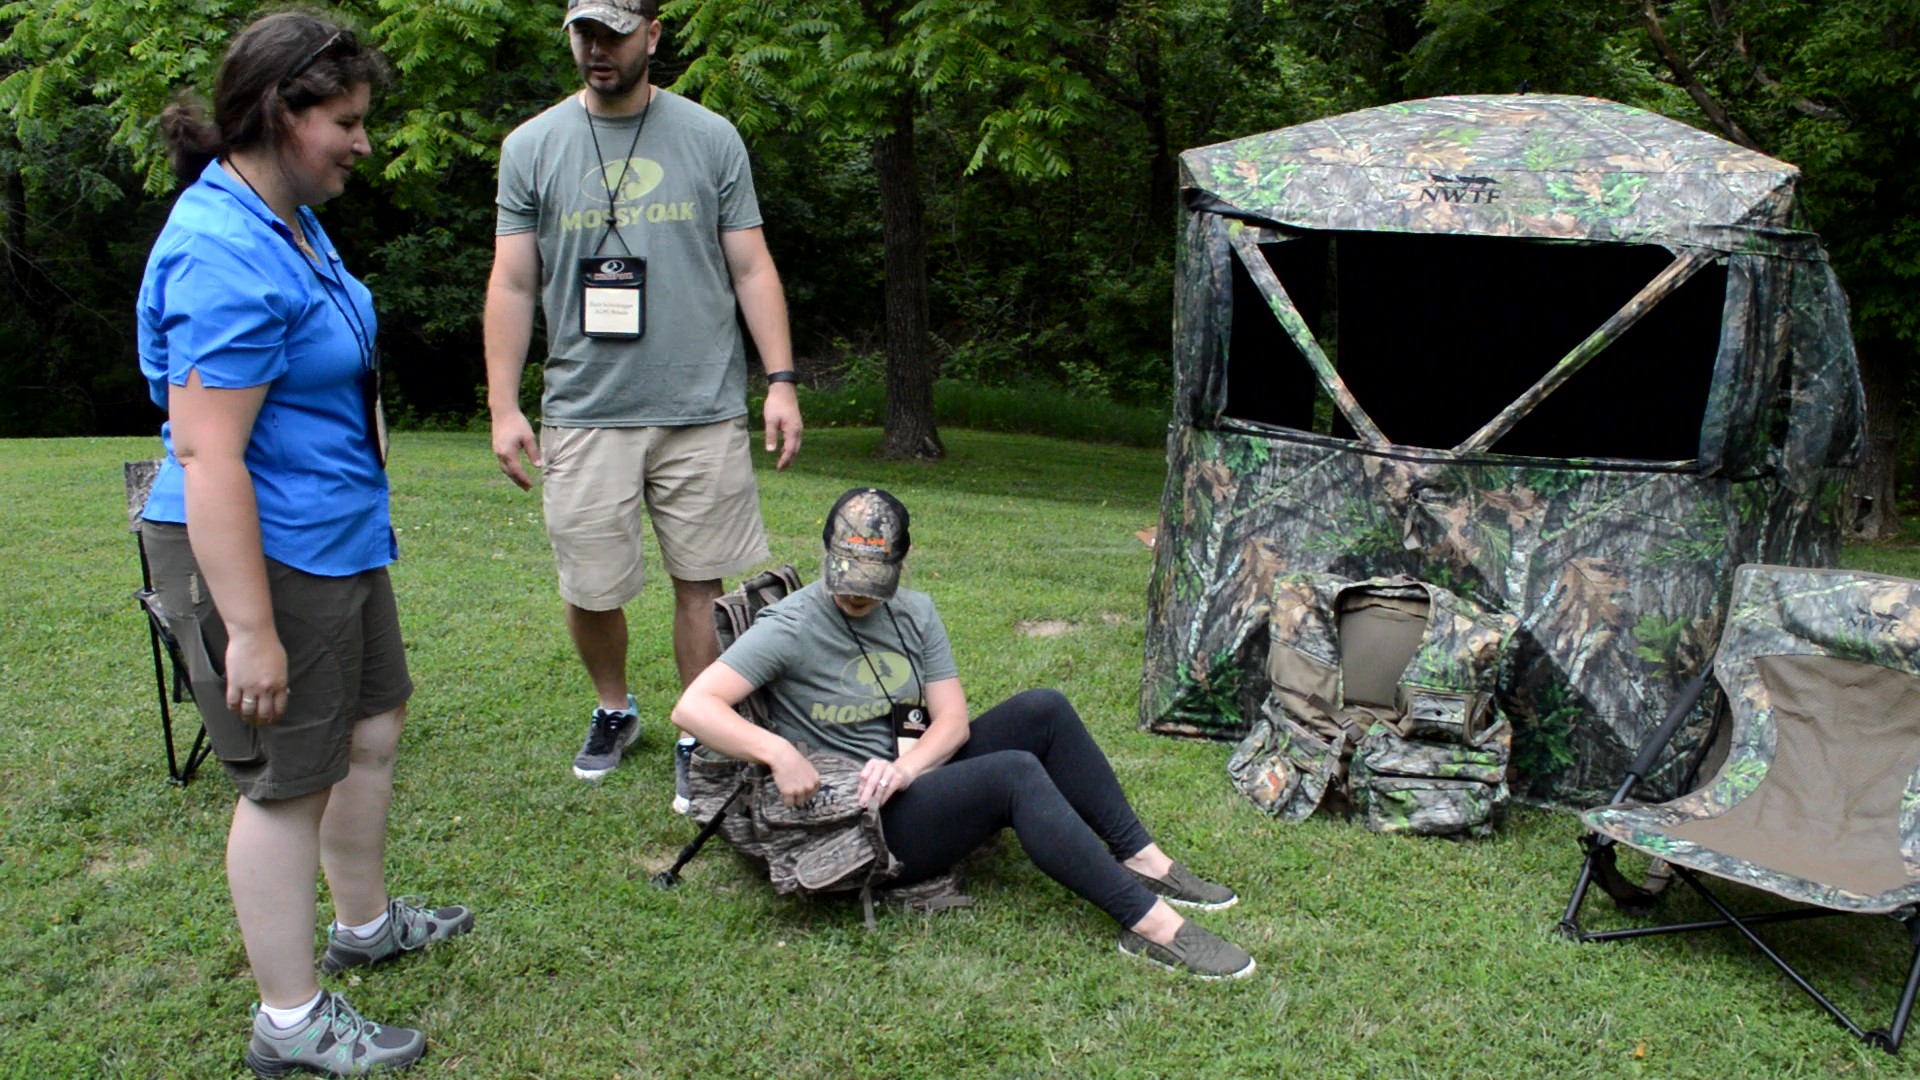 Zach and Sarah from Alpz Brands show off their NWTF vests and blinds for turkey hunters. Here, Sarah demonstates the comfort of the Grand Slam vest, built with a removeable kickstand frame, adjustable legs, and a foldaway padded seat. (Photo: Kristin Alberts)